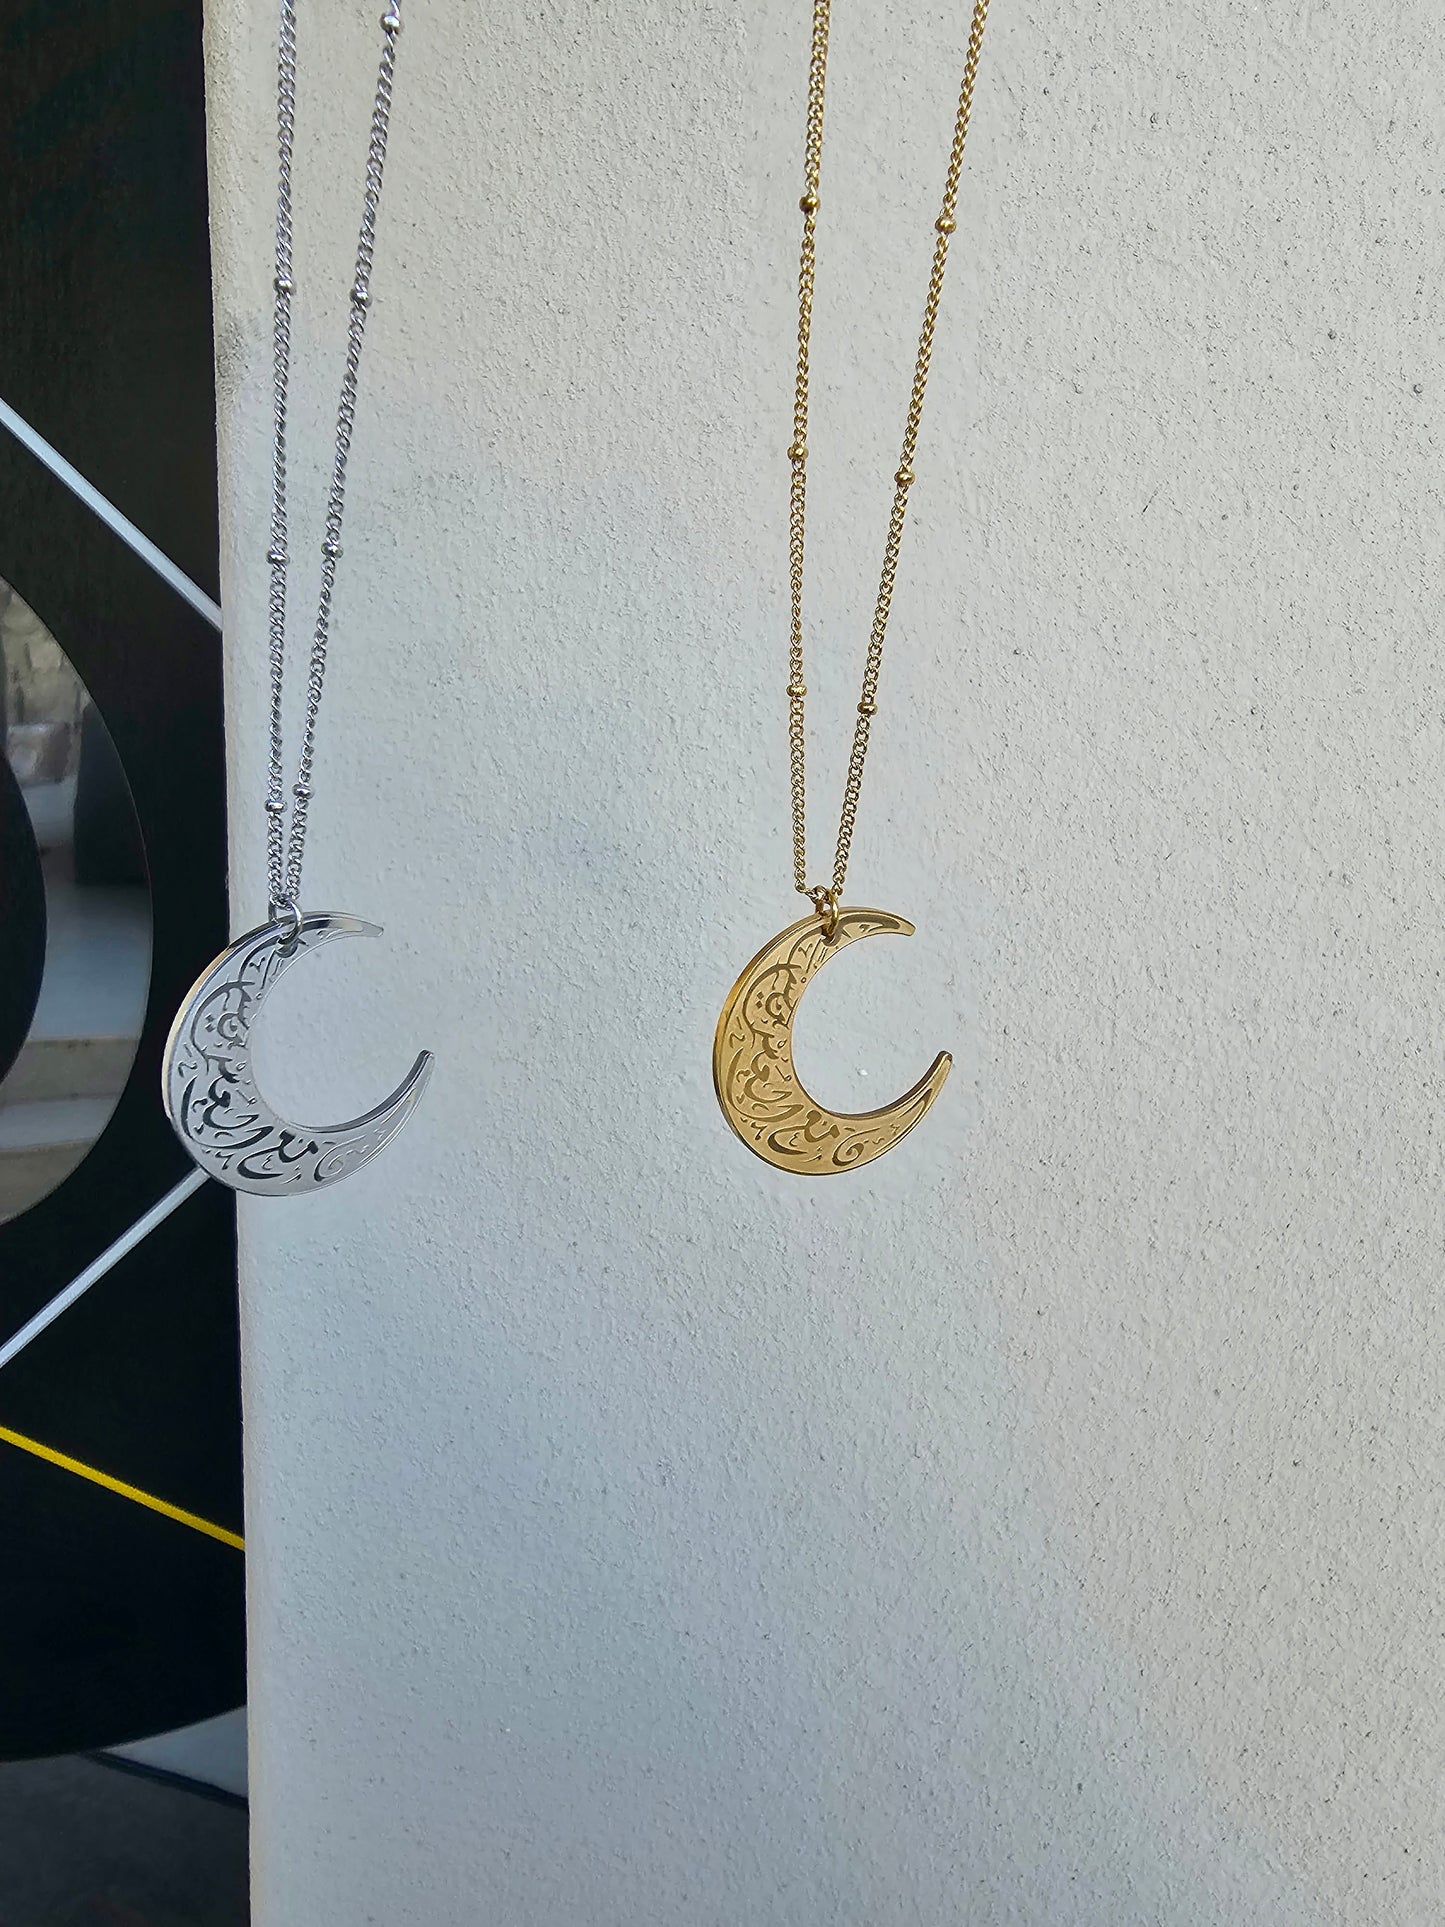 CRESCENT NECKLACE | VERILY WITH HARDSHIP COMES EASE